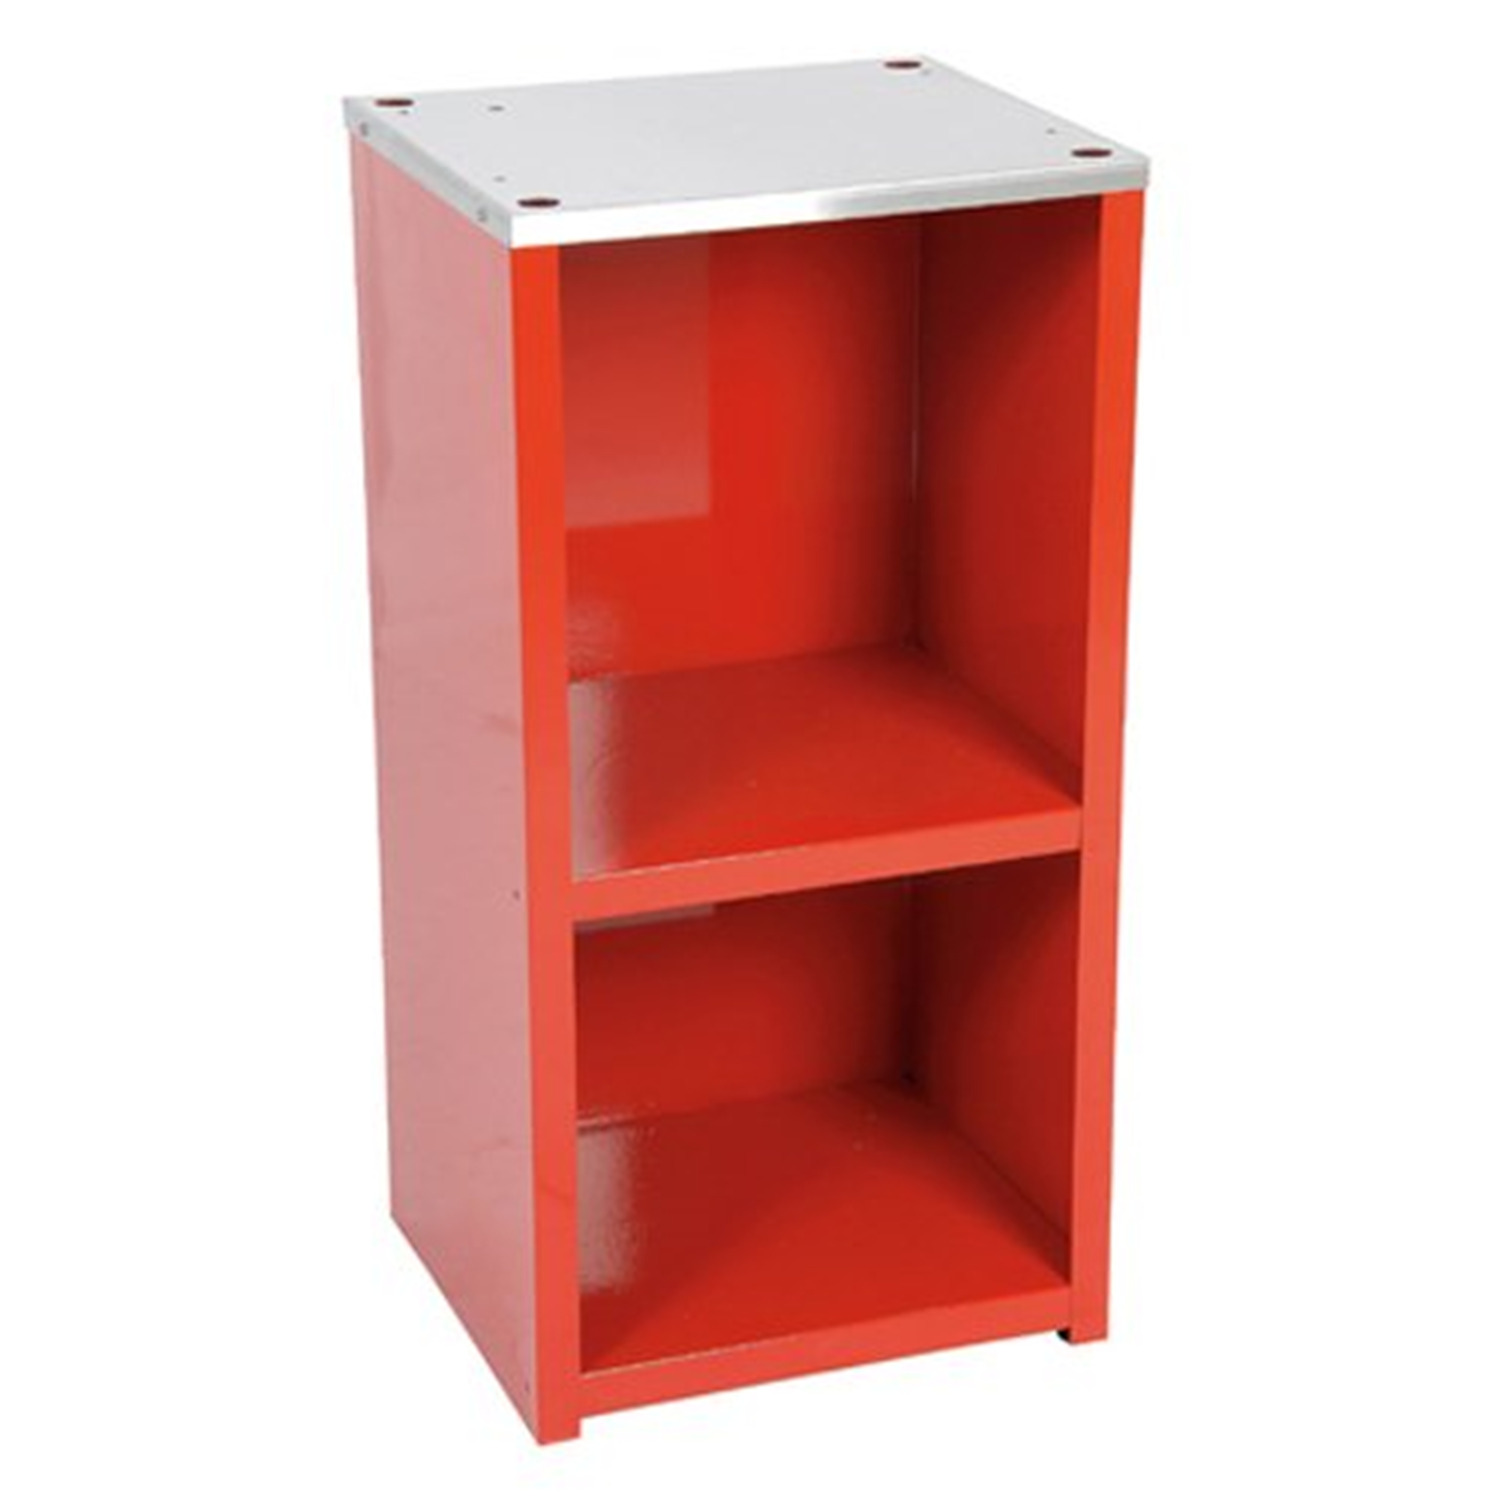 Paragon Small TP/TF 4 Red Stand - image 1 of 2